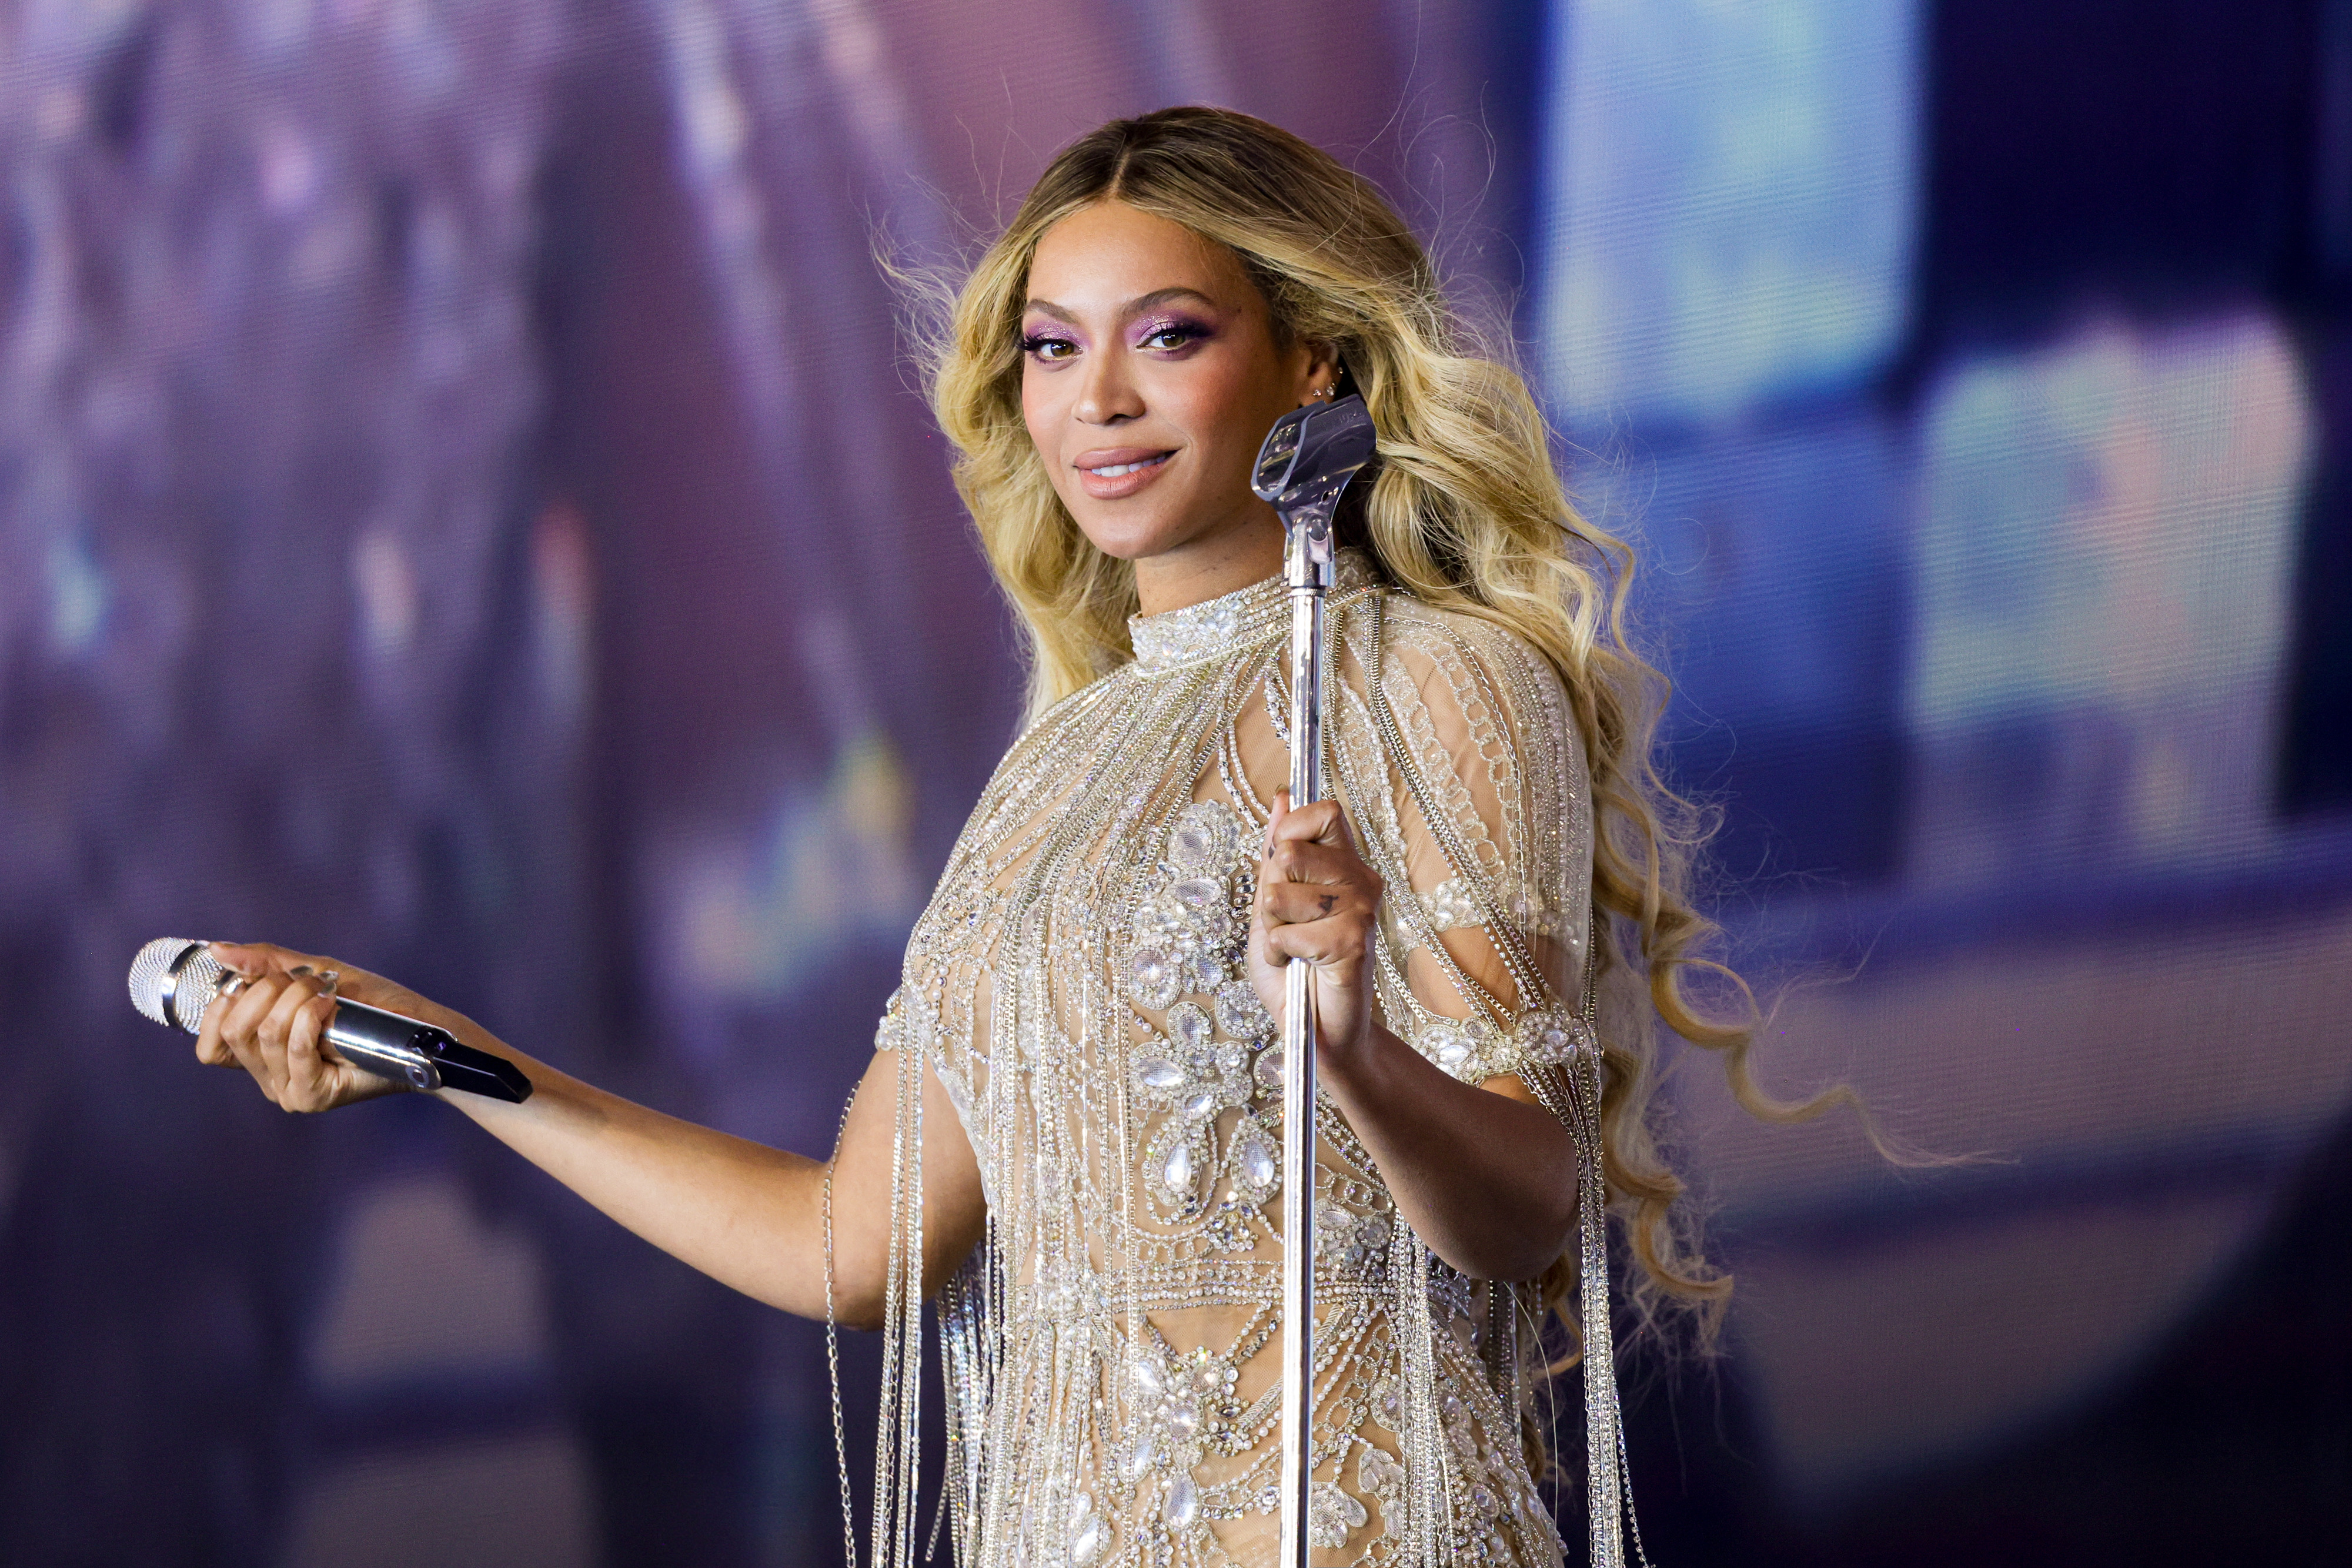 Beyoncé onstage listening to the crowd sing